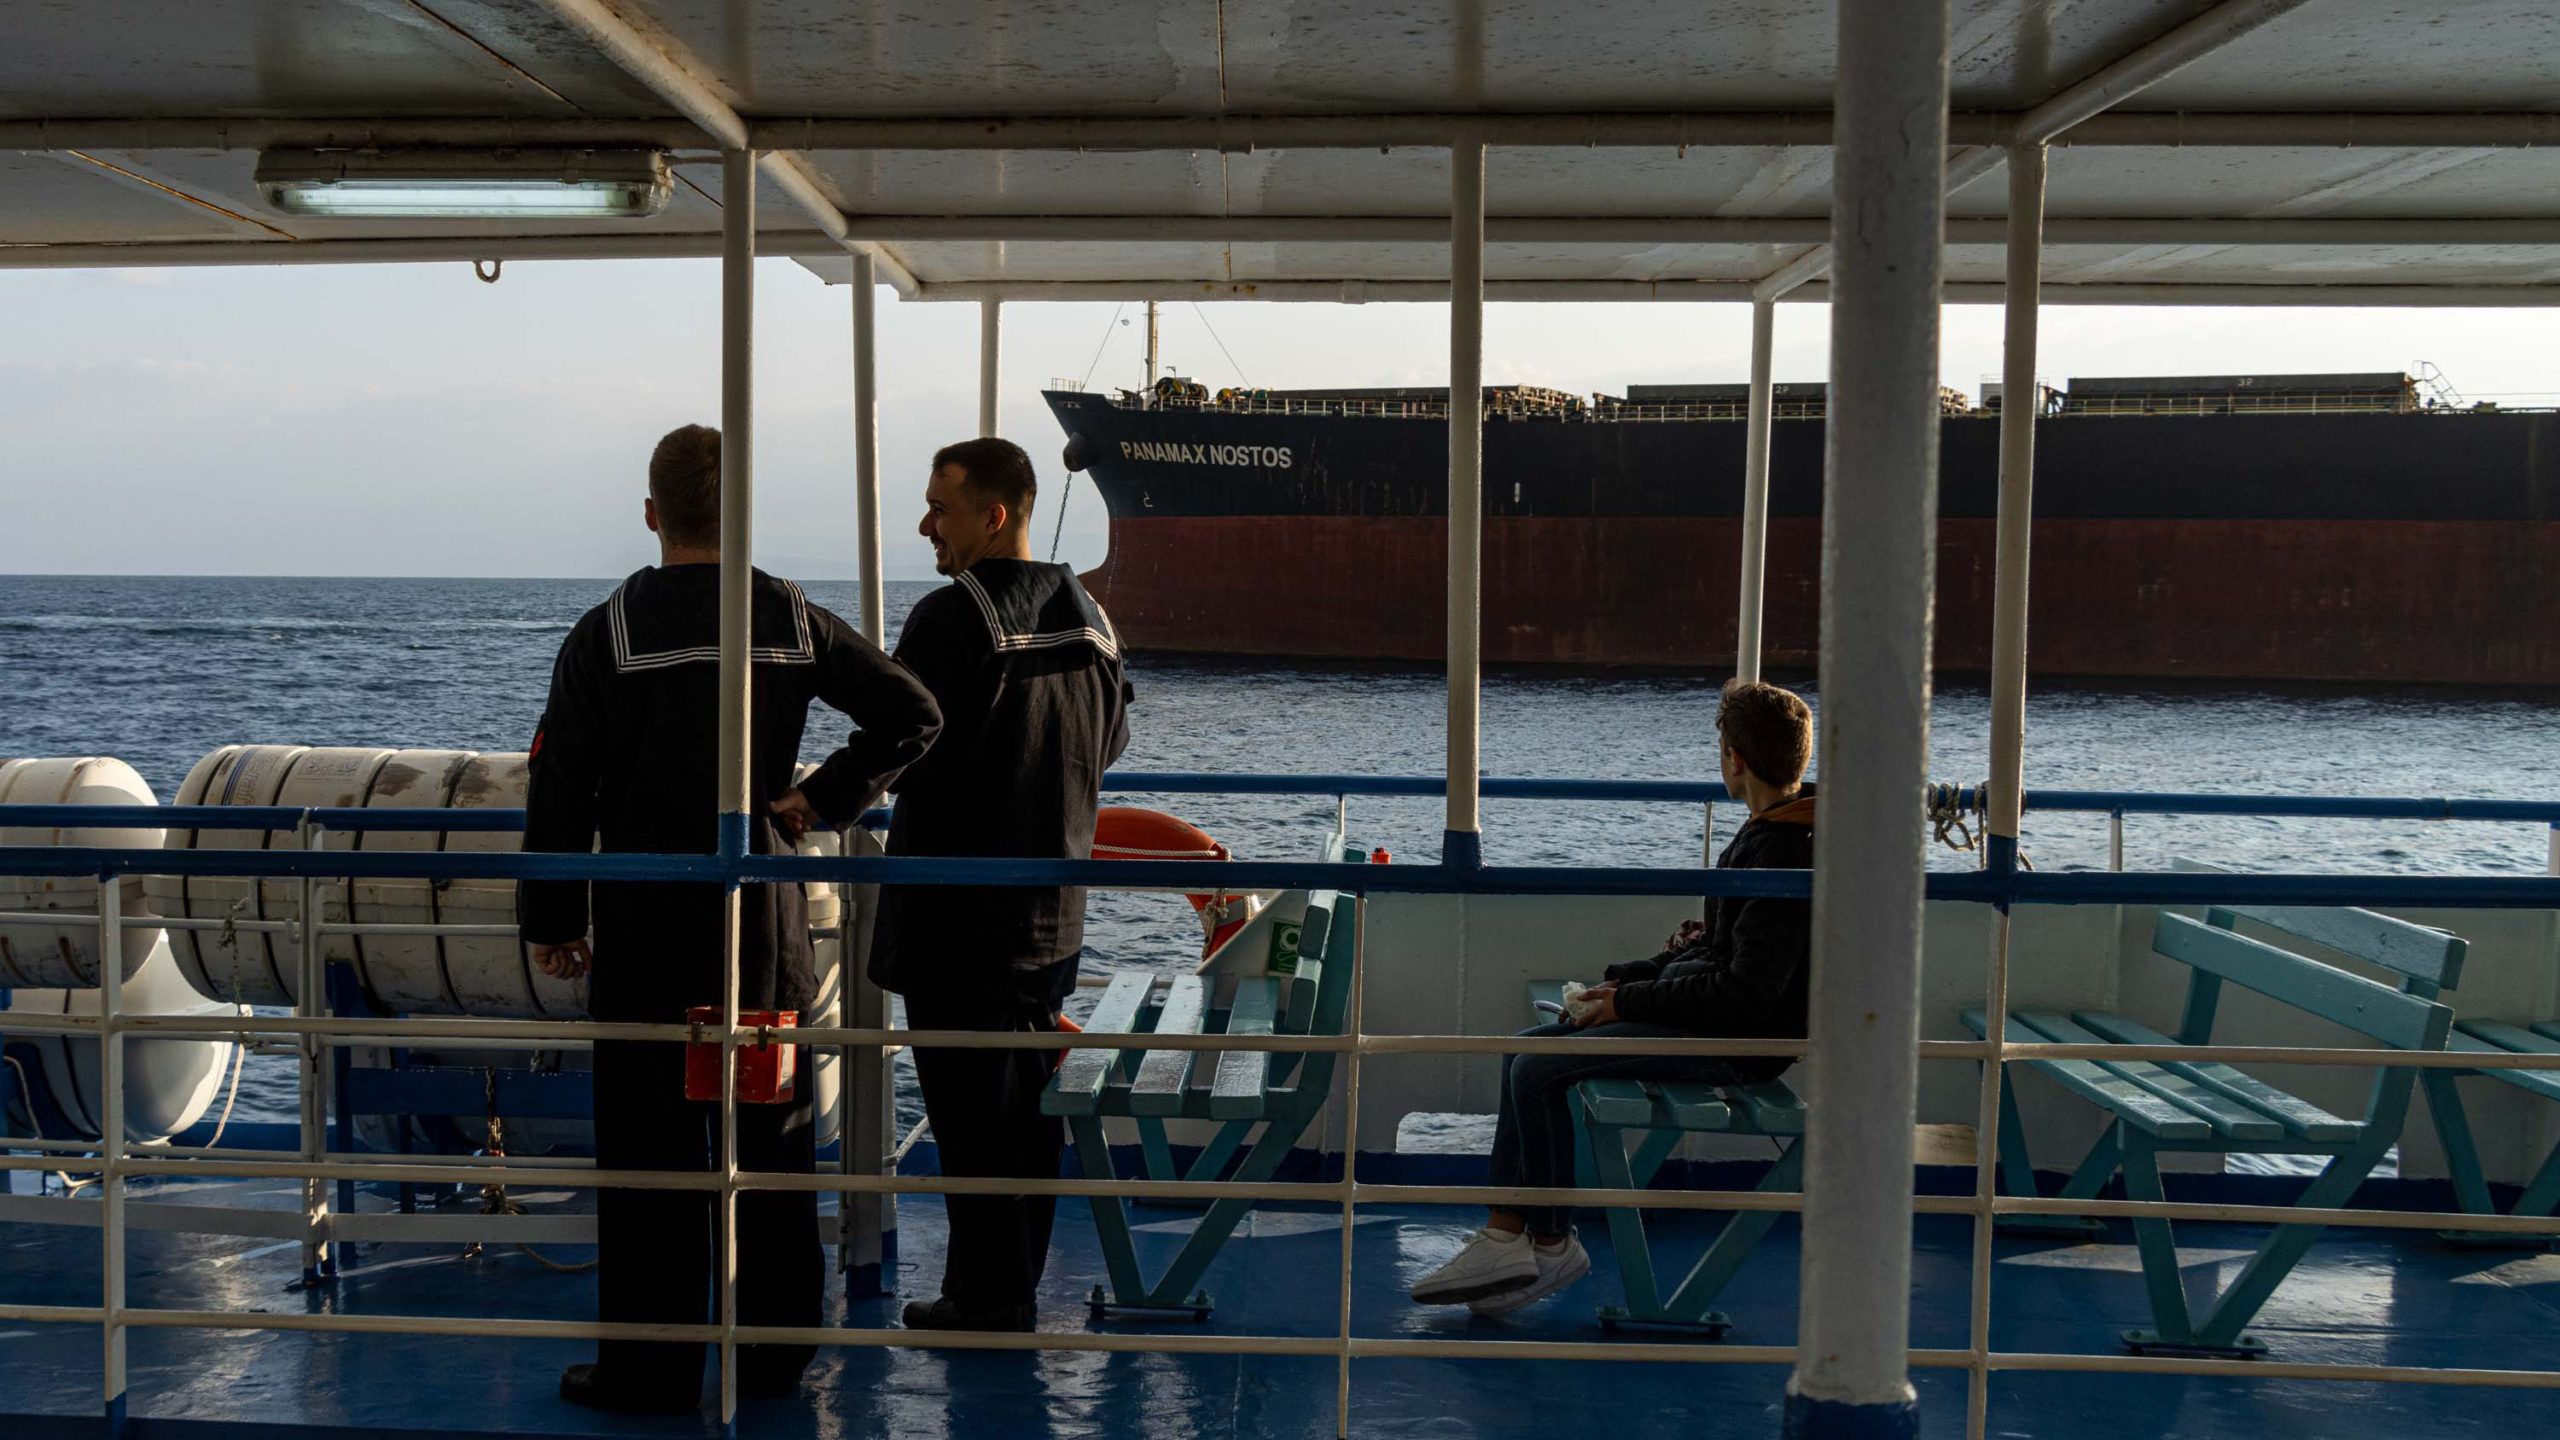 How two Greek islands came to lead the world’s shipping industry